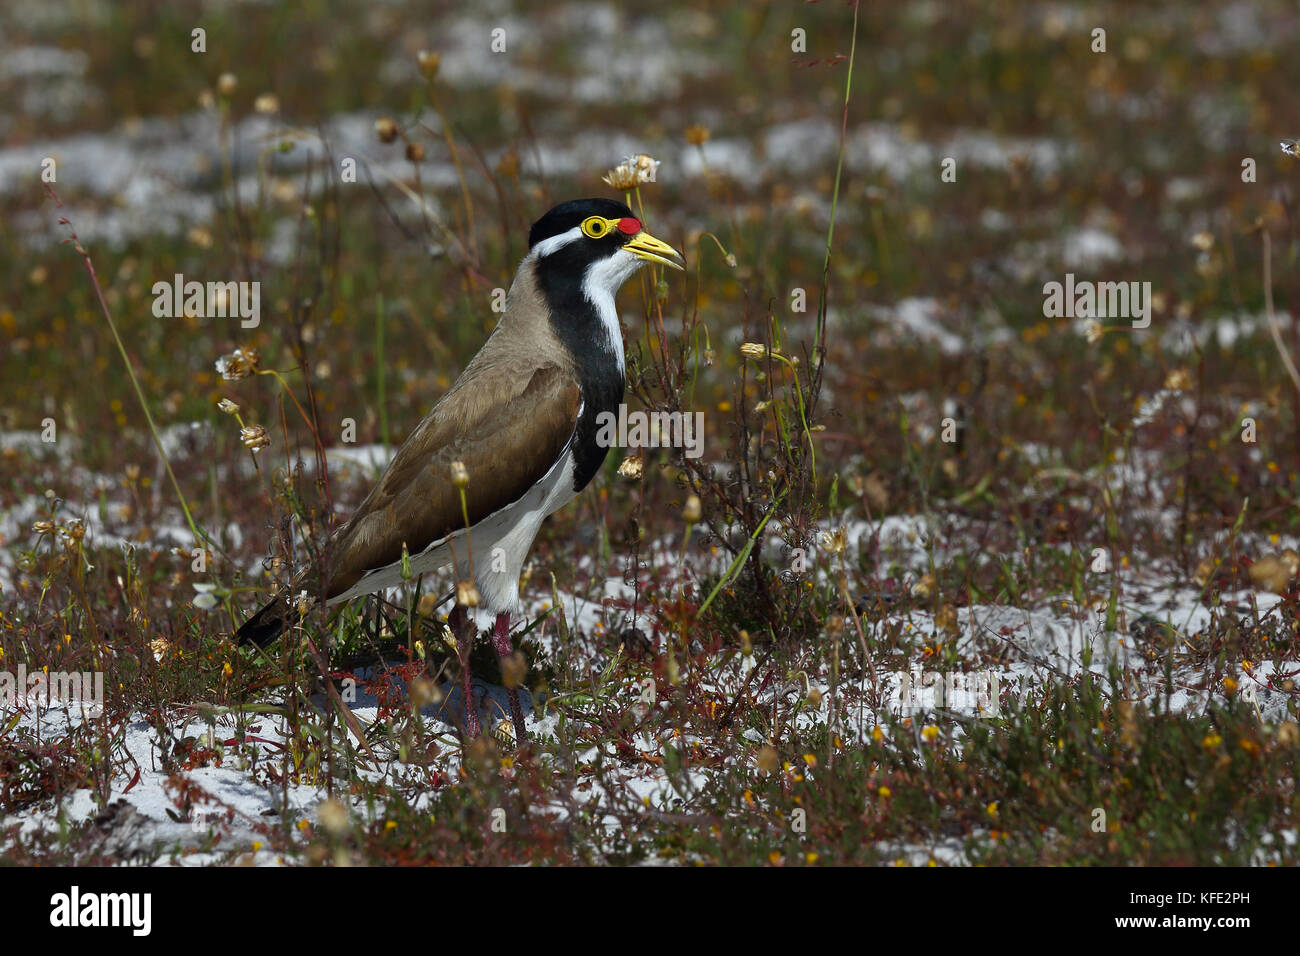 Banded lapwing (Vanellus tricolor) on the ground. Australind, South West region, Western Australia, Australia Stock Photo